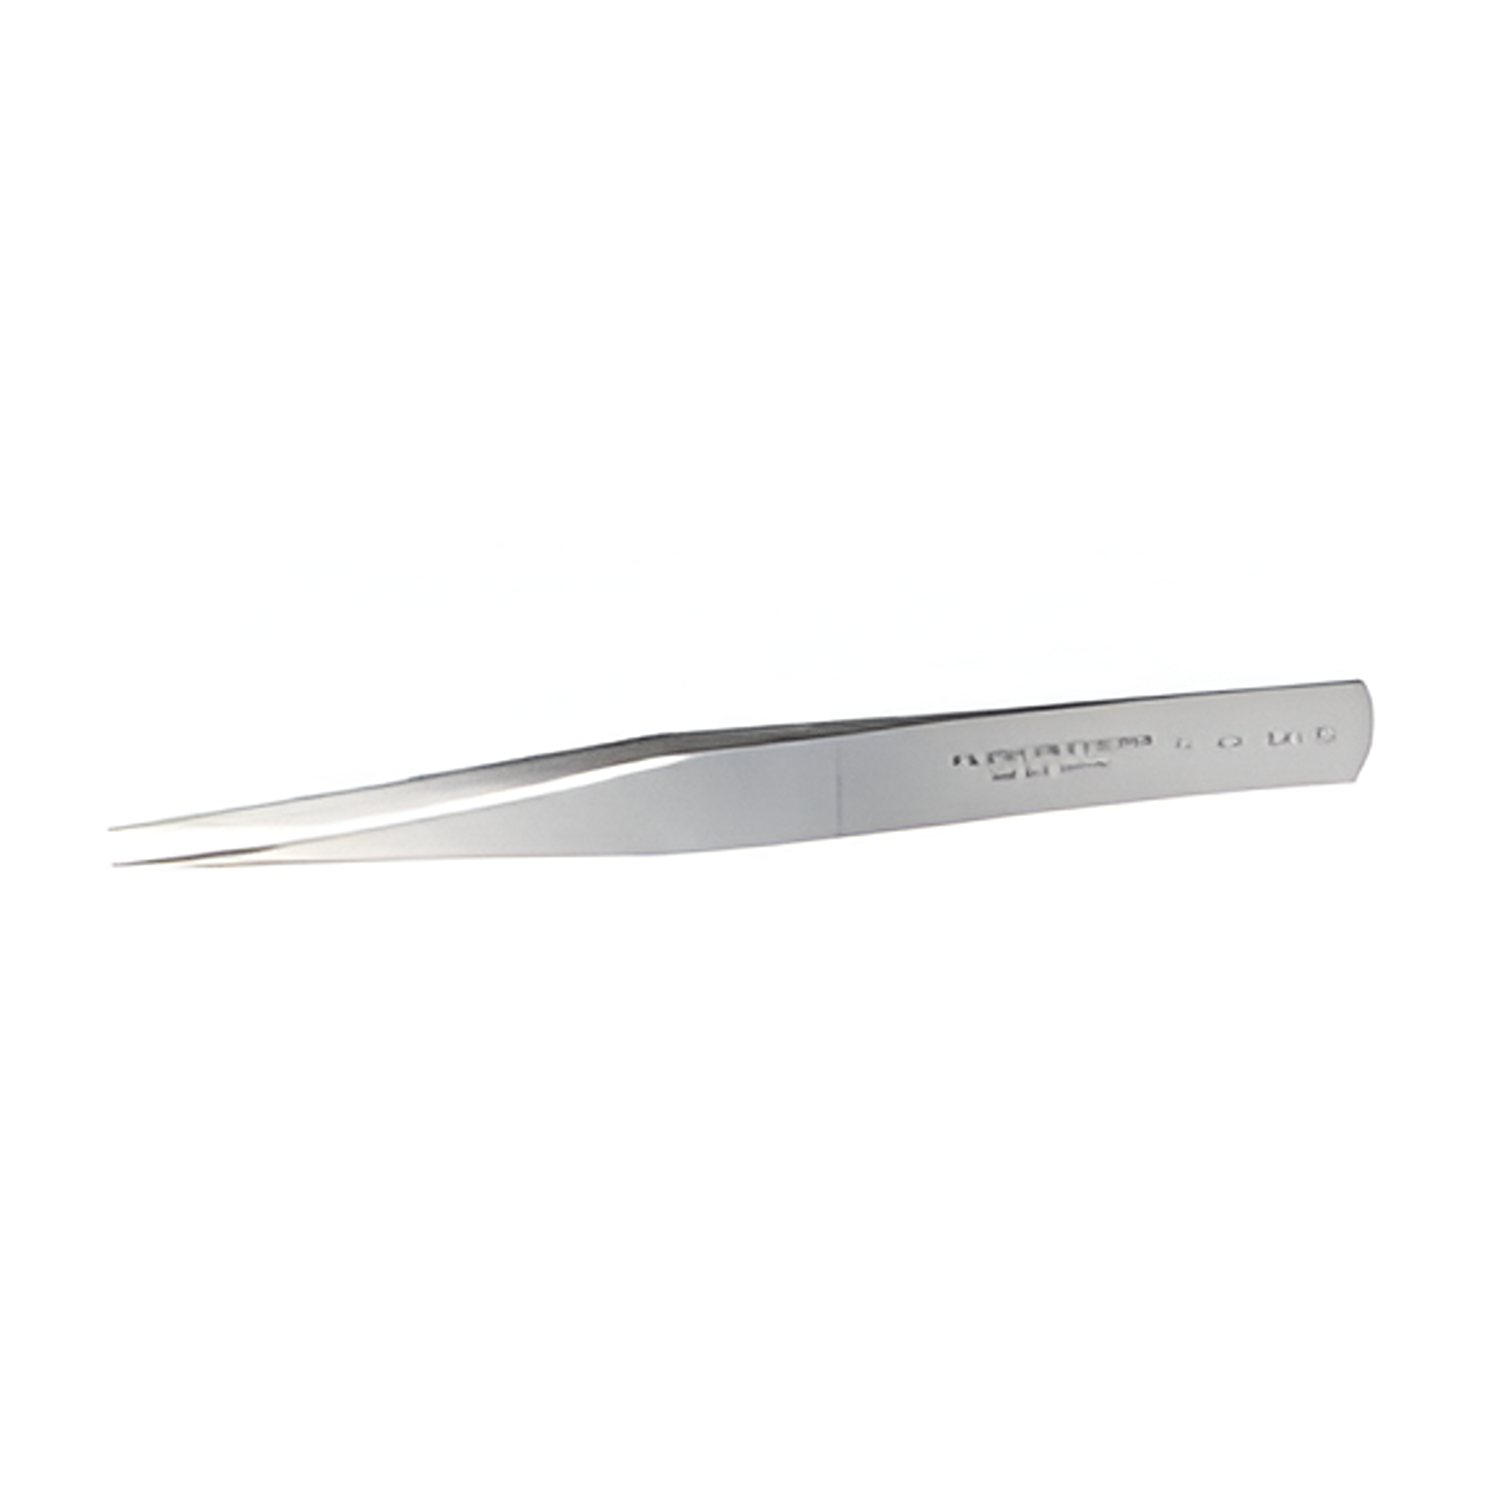 BAHCO TL AA-SA-SL Tweezers with Strong and Fine Tips 130 mm - Premium Tweezers from BAHCO - Shop now at Yew Aik.